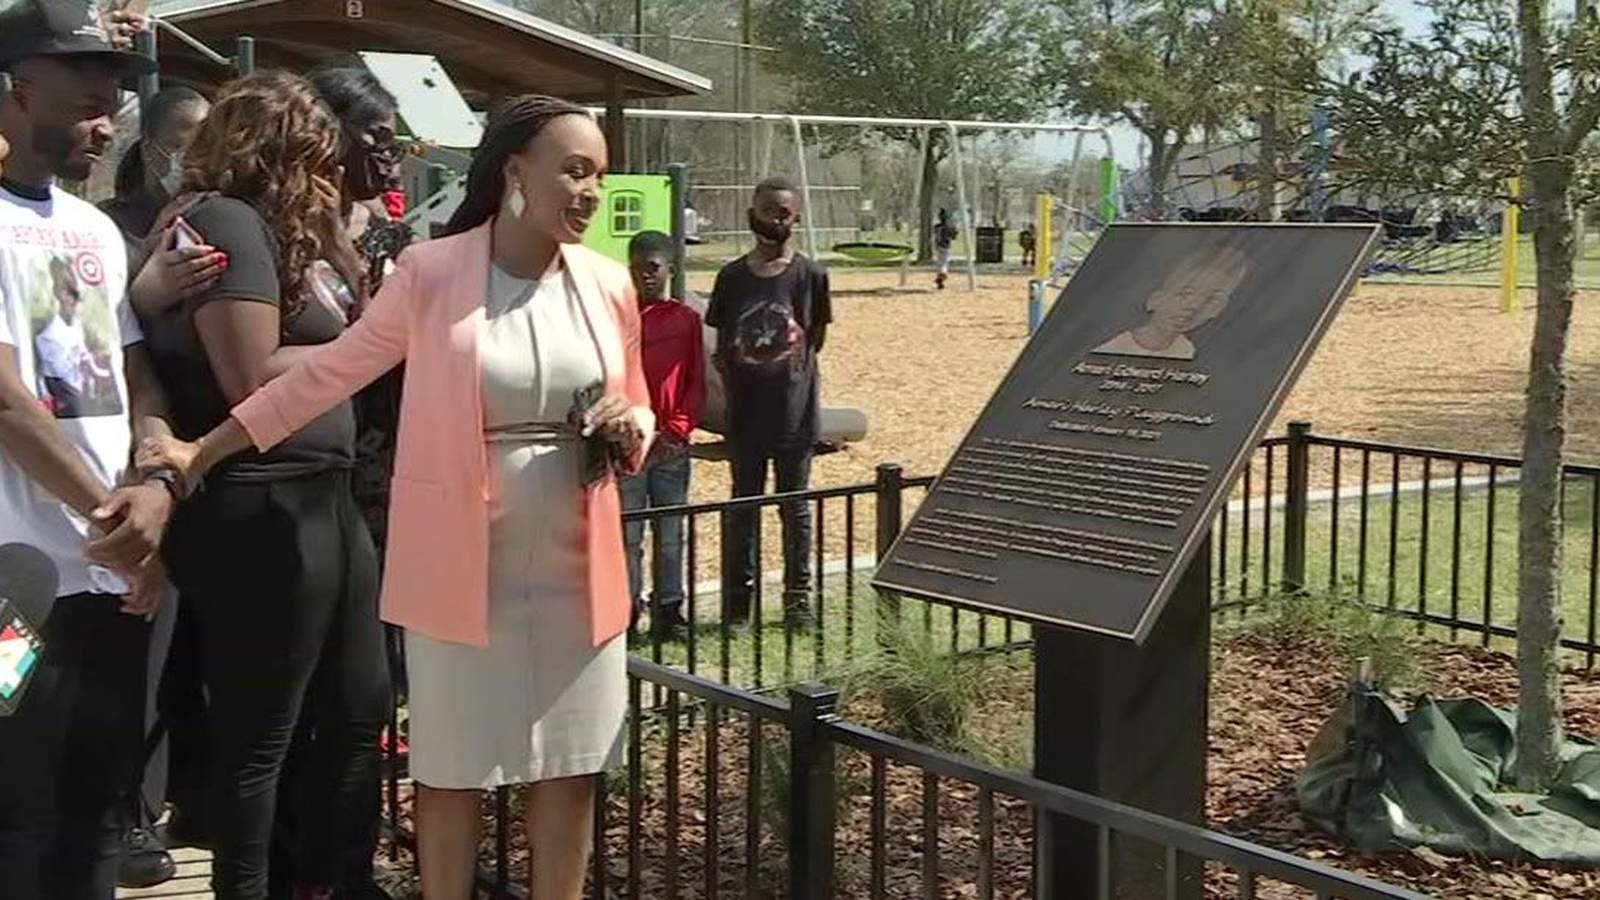 Playground dedication honors 3-year-old who drowned at Jacksonville park